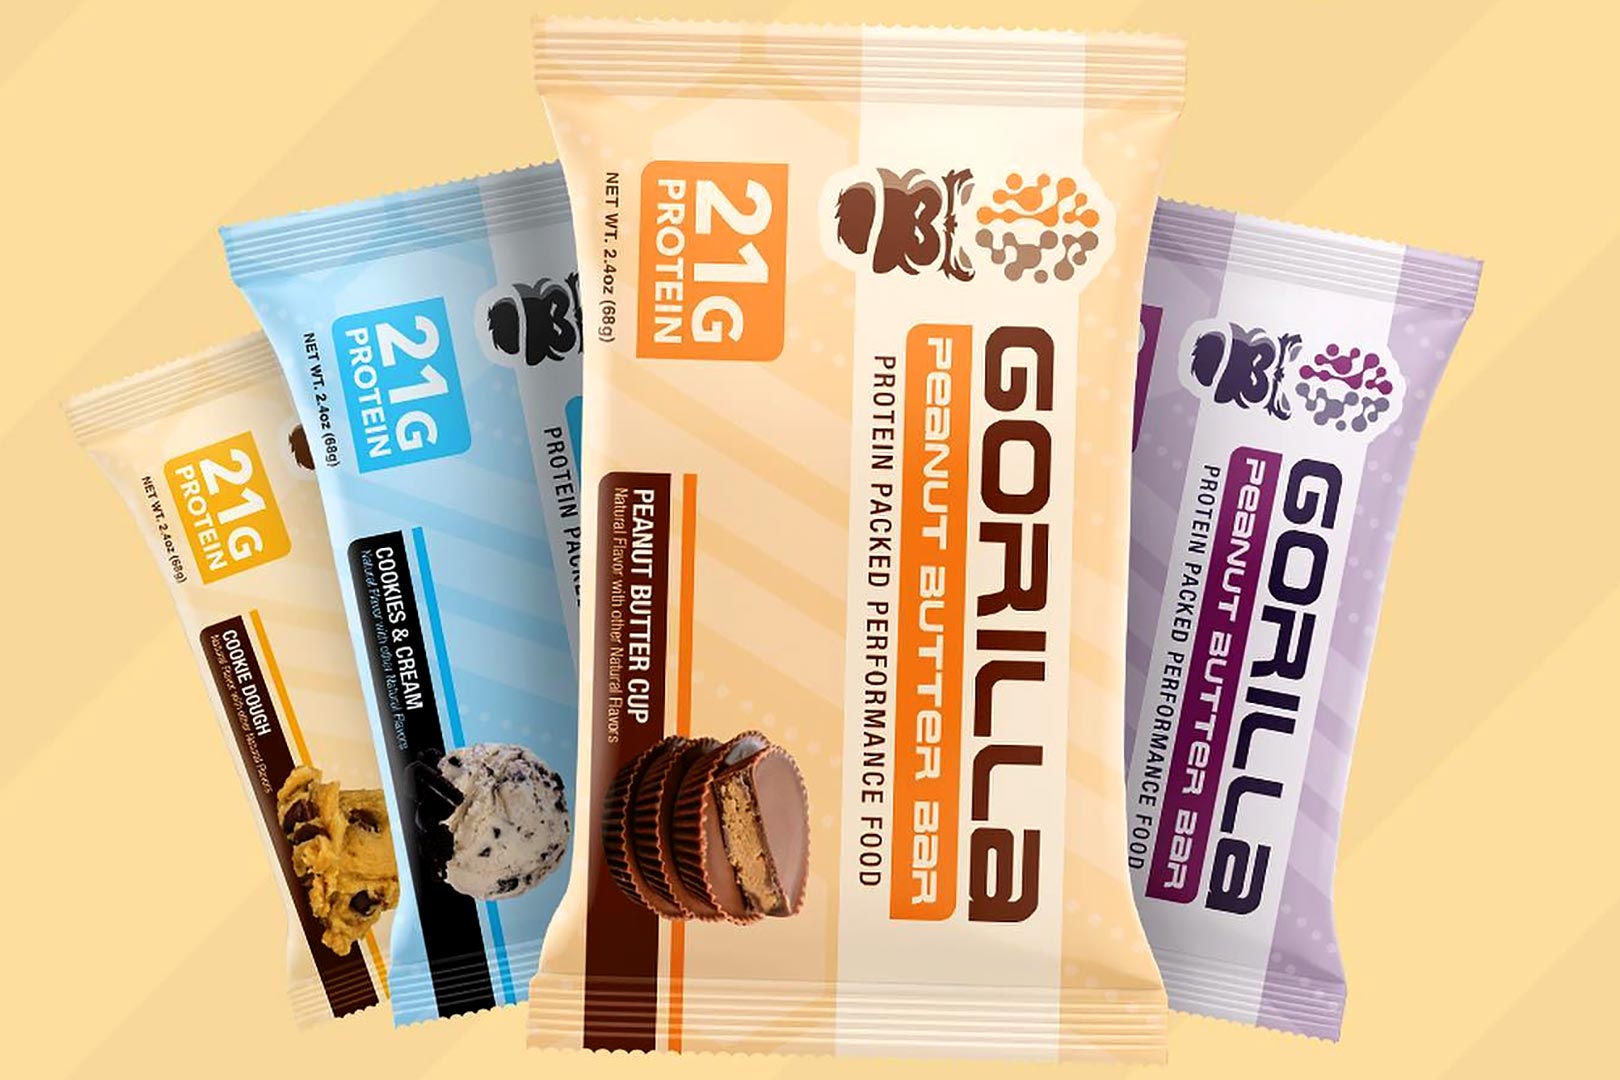 Gorilla Mind breaks into functional food with a protein-packed peanut butter-based bar